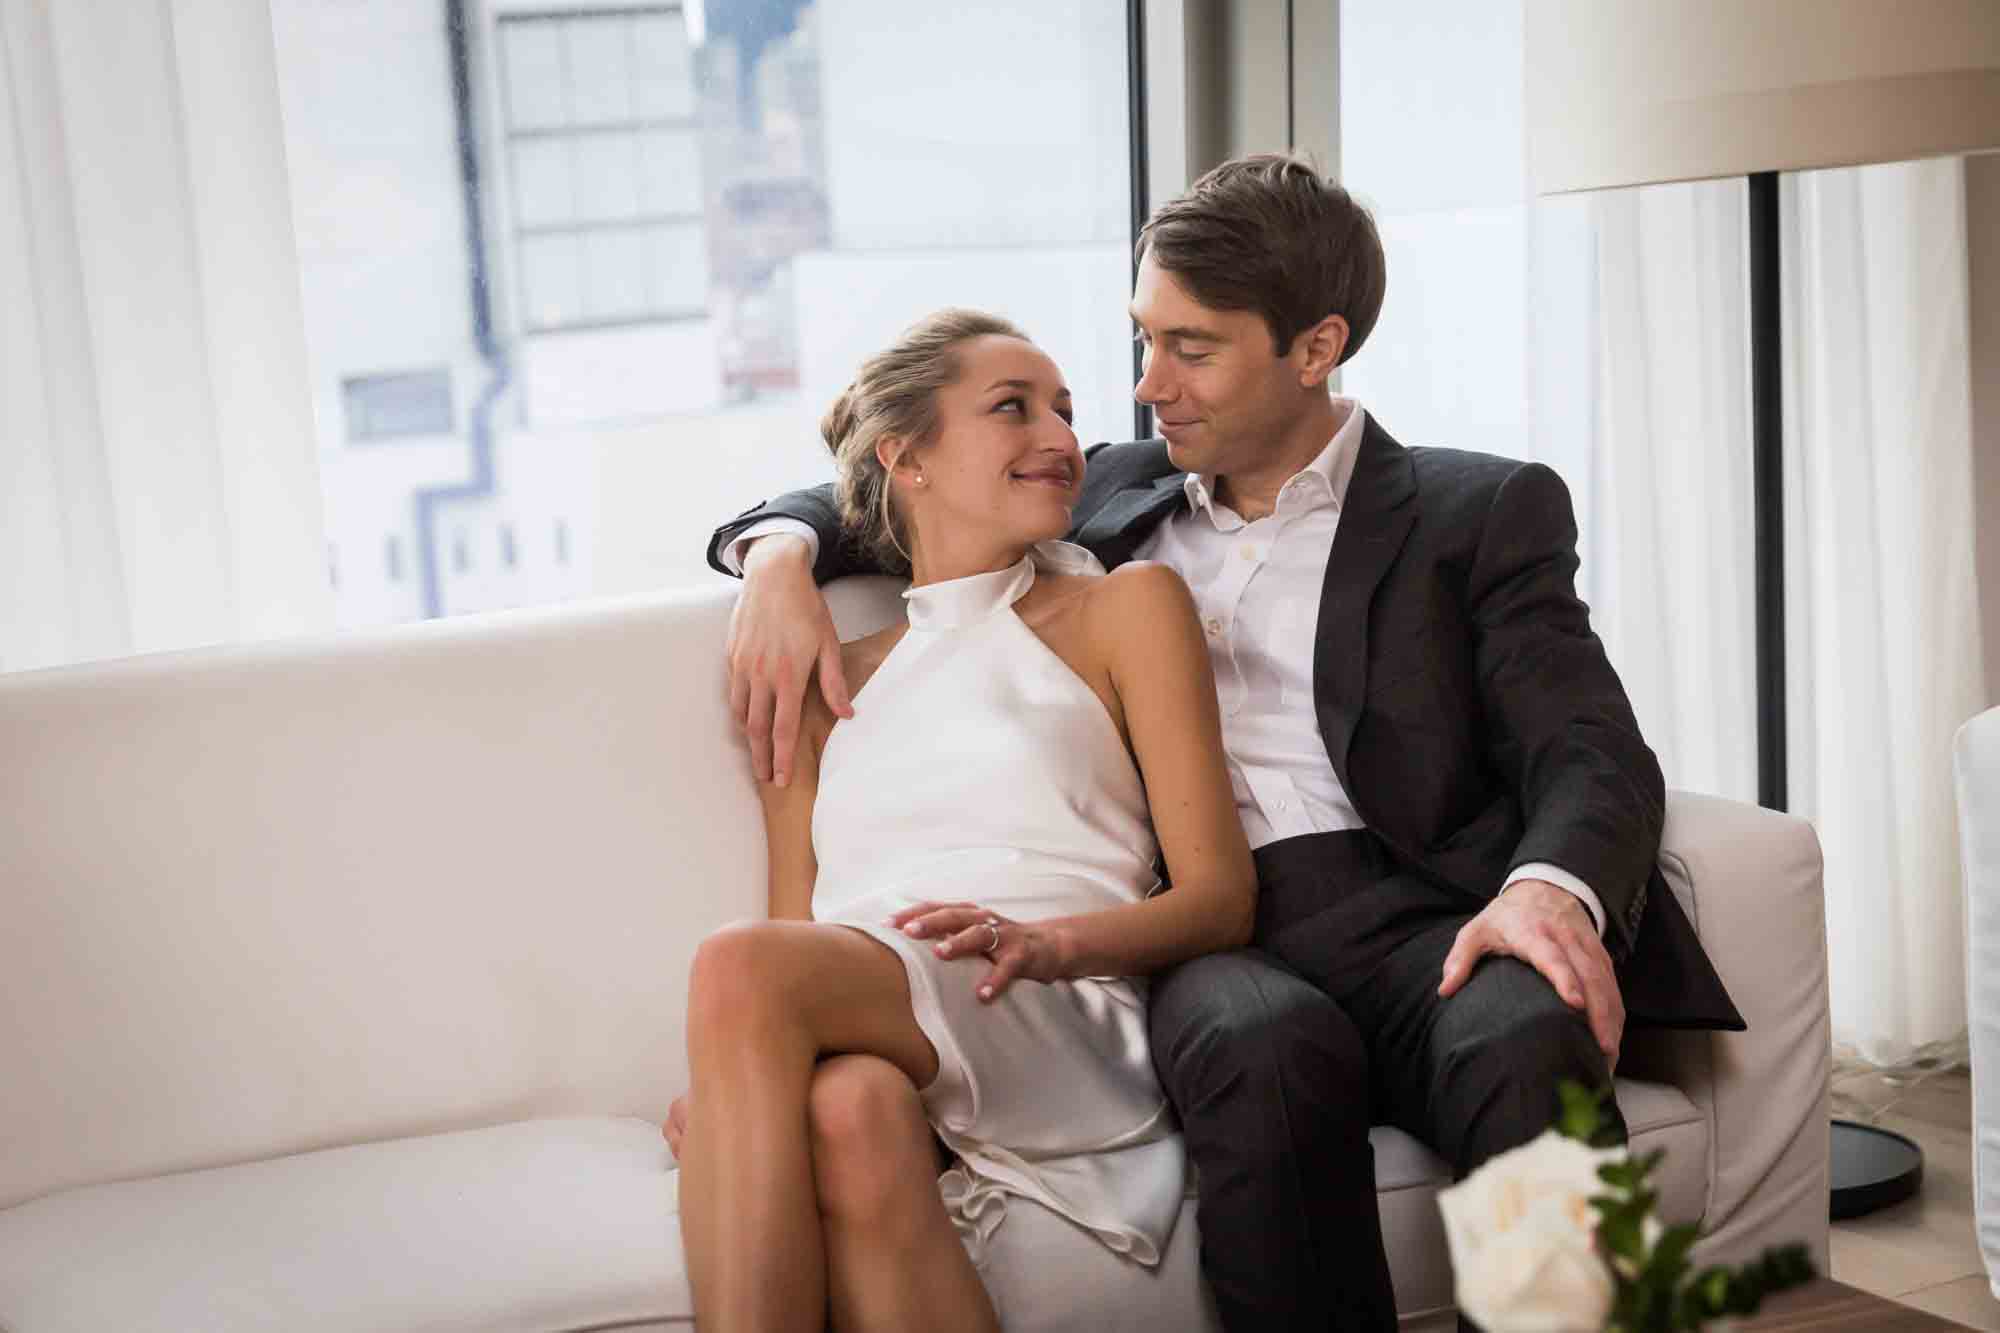 Bride and groom sitting close on white couch in hotel room